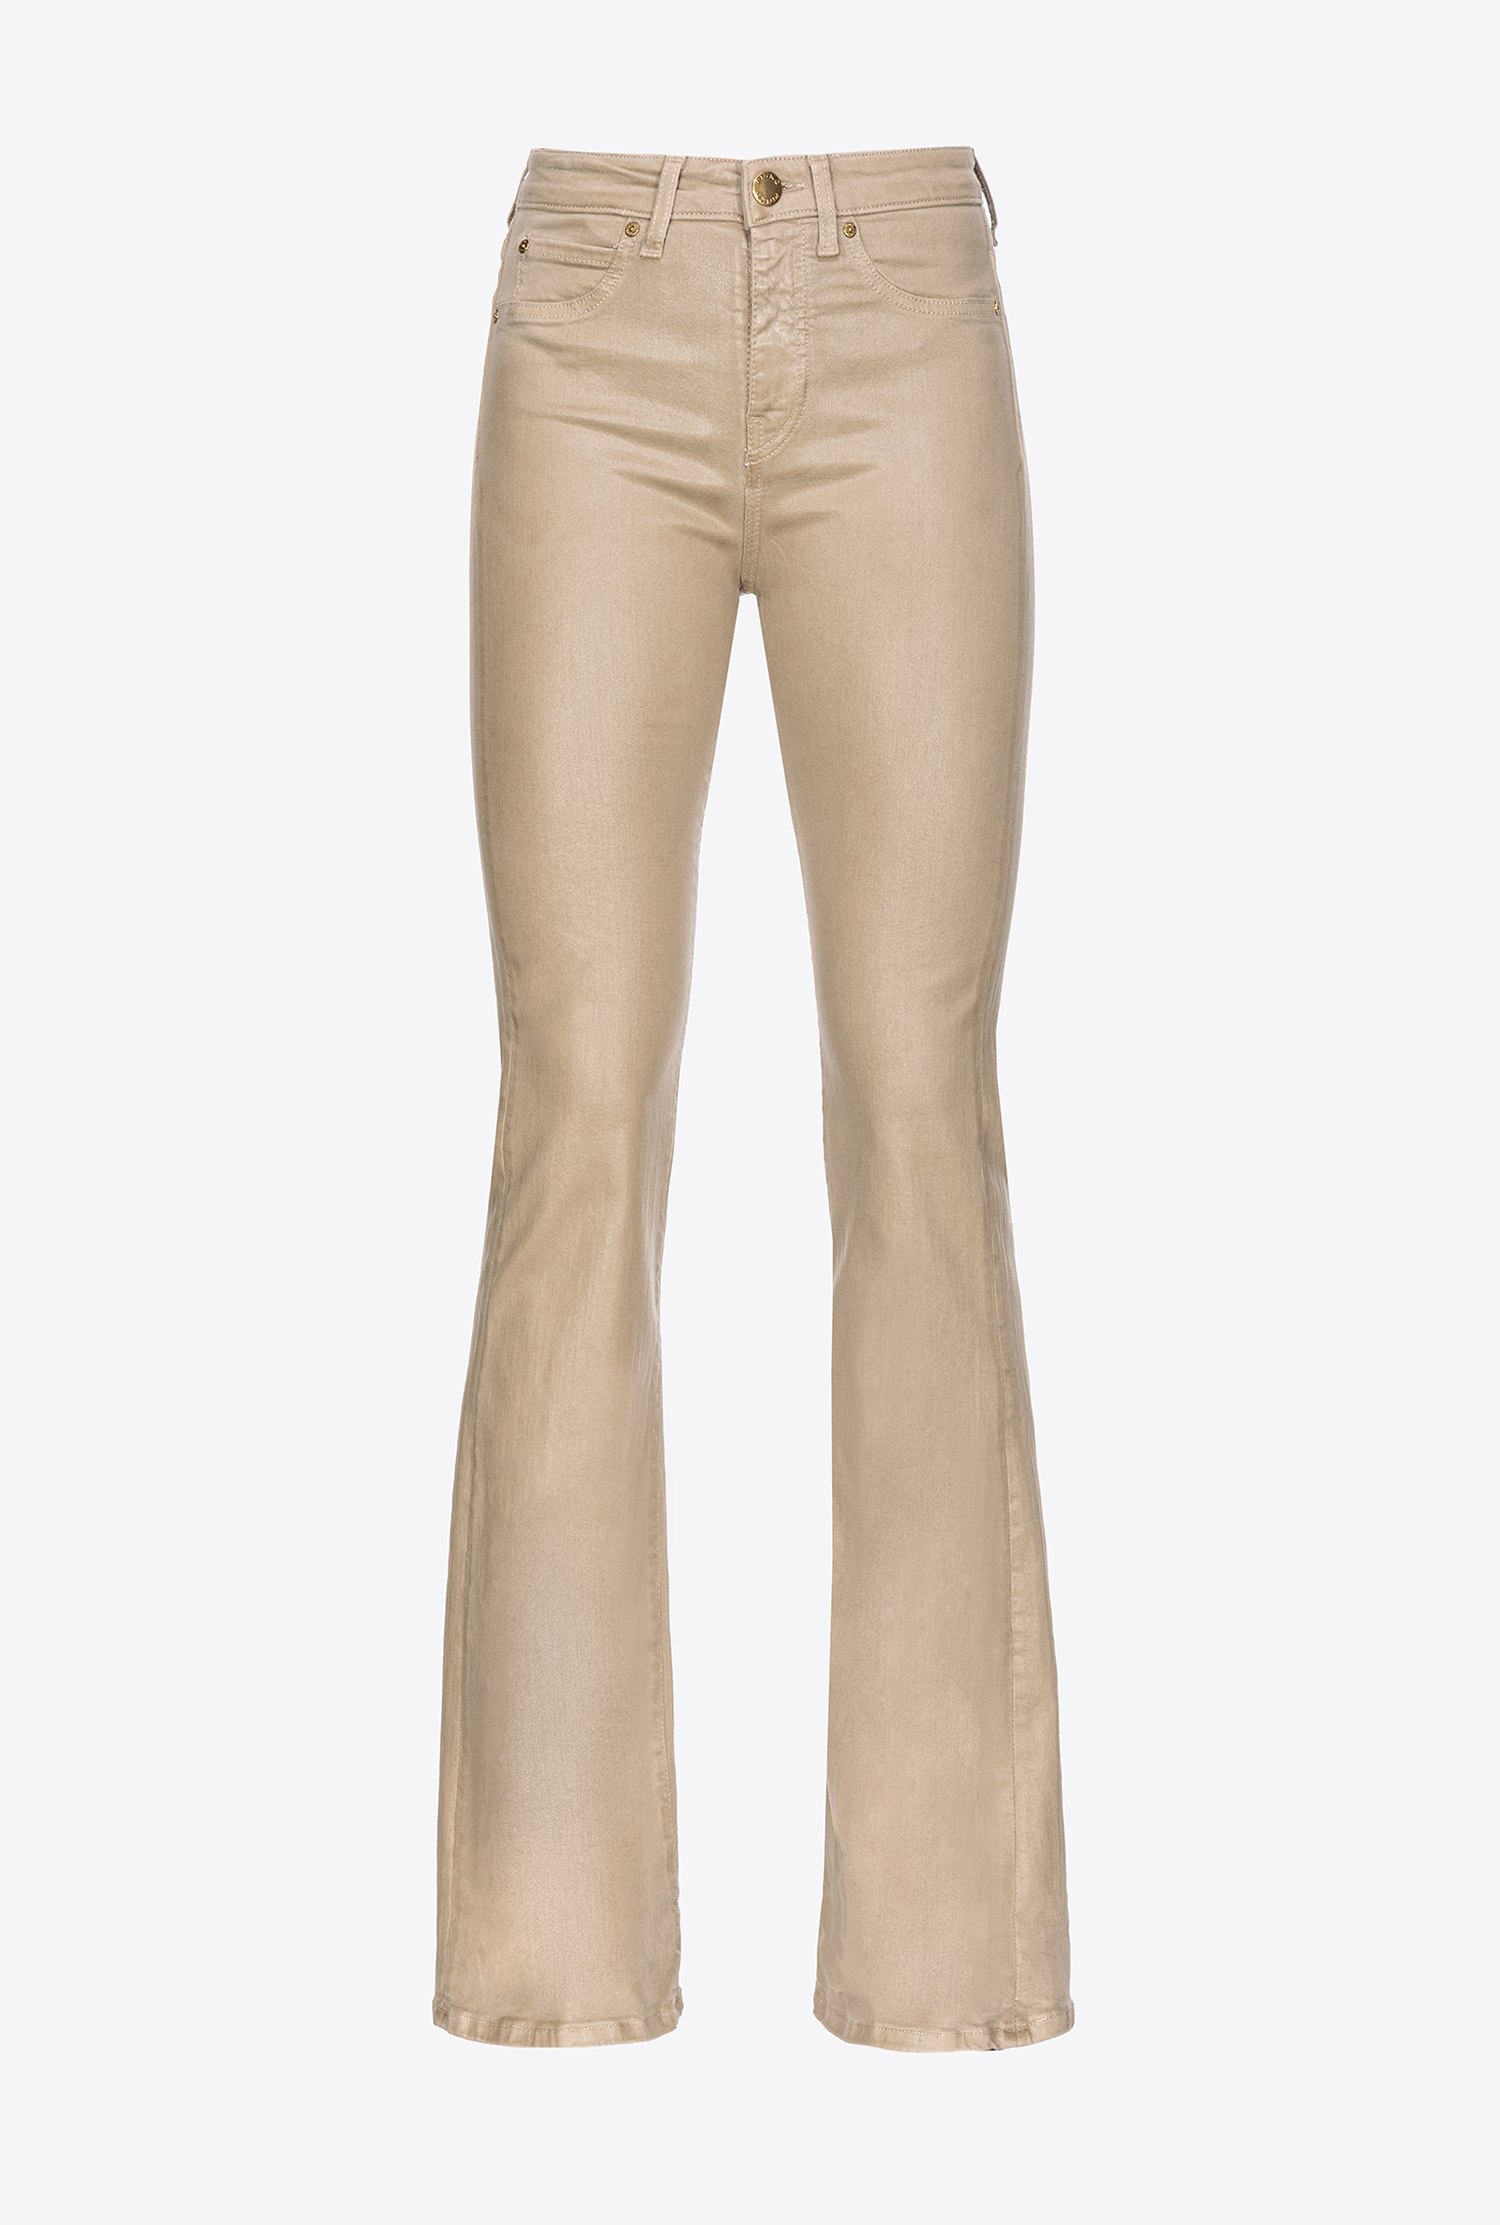 PINKO FLARED LEATHER-LOOK DRILL JEANS